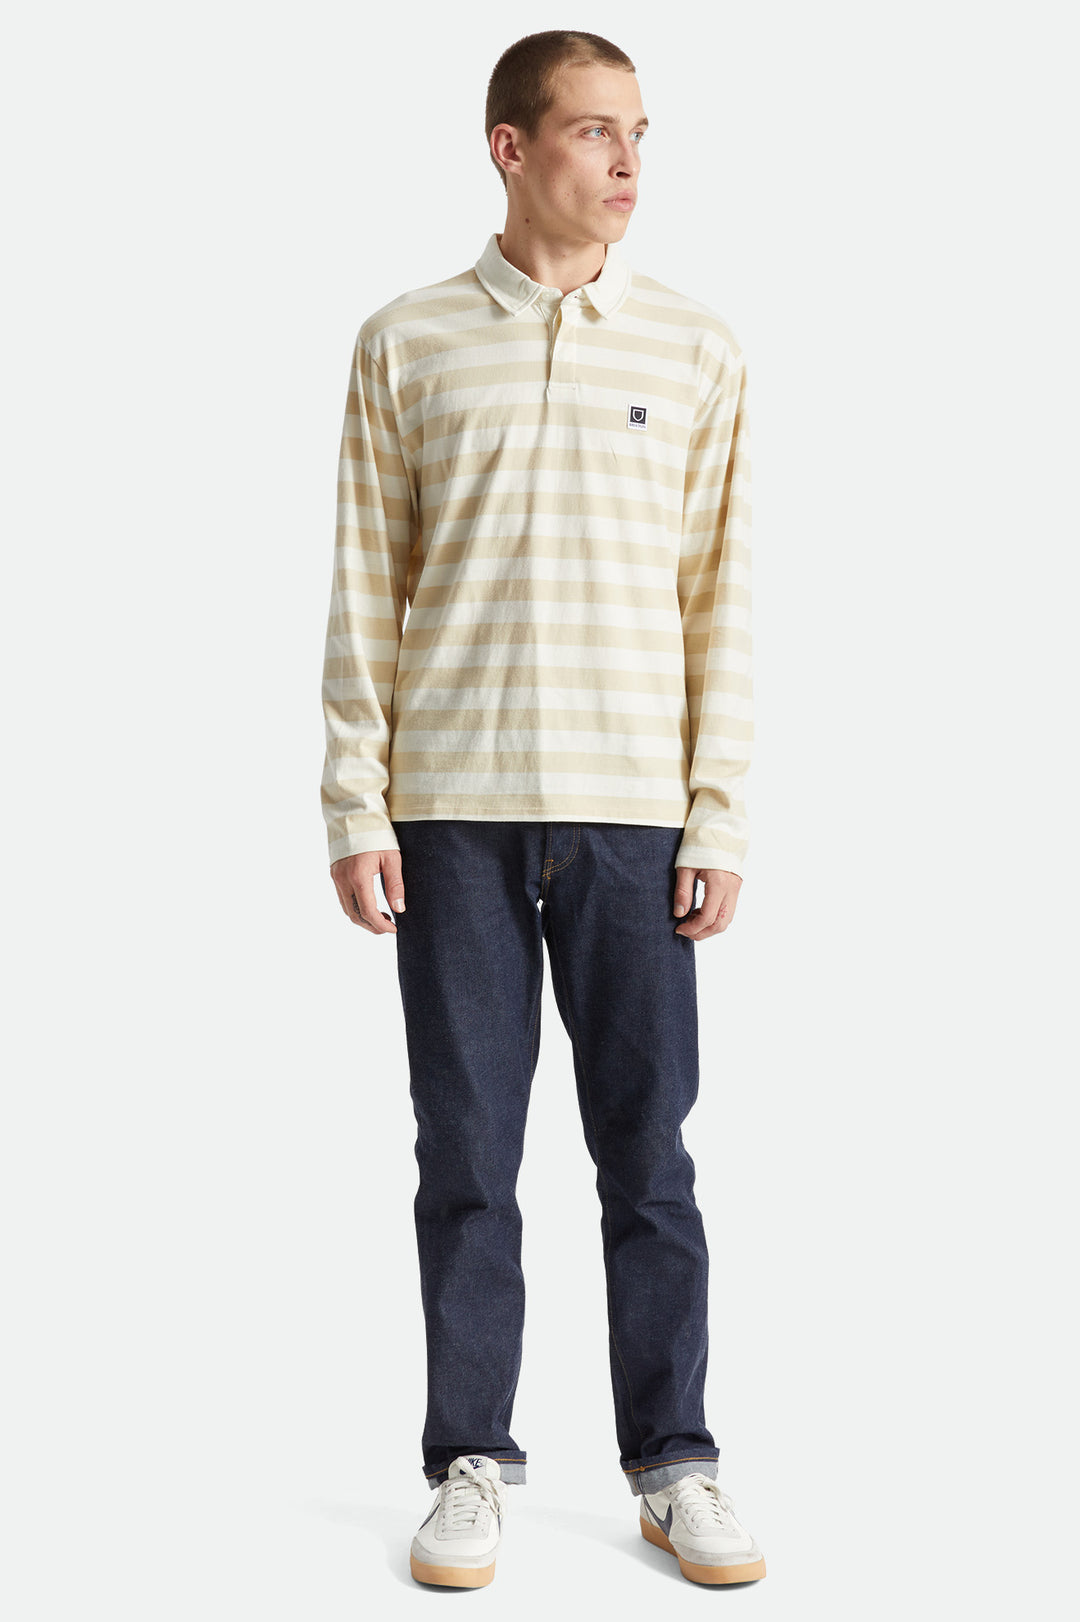 BRIXTON BETA RUGBY LONG SLEEVE KNIT TOP GRAVEL / OFF WHITE